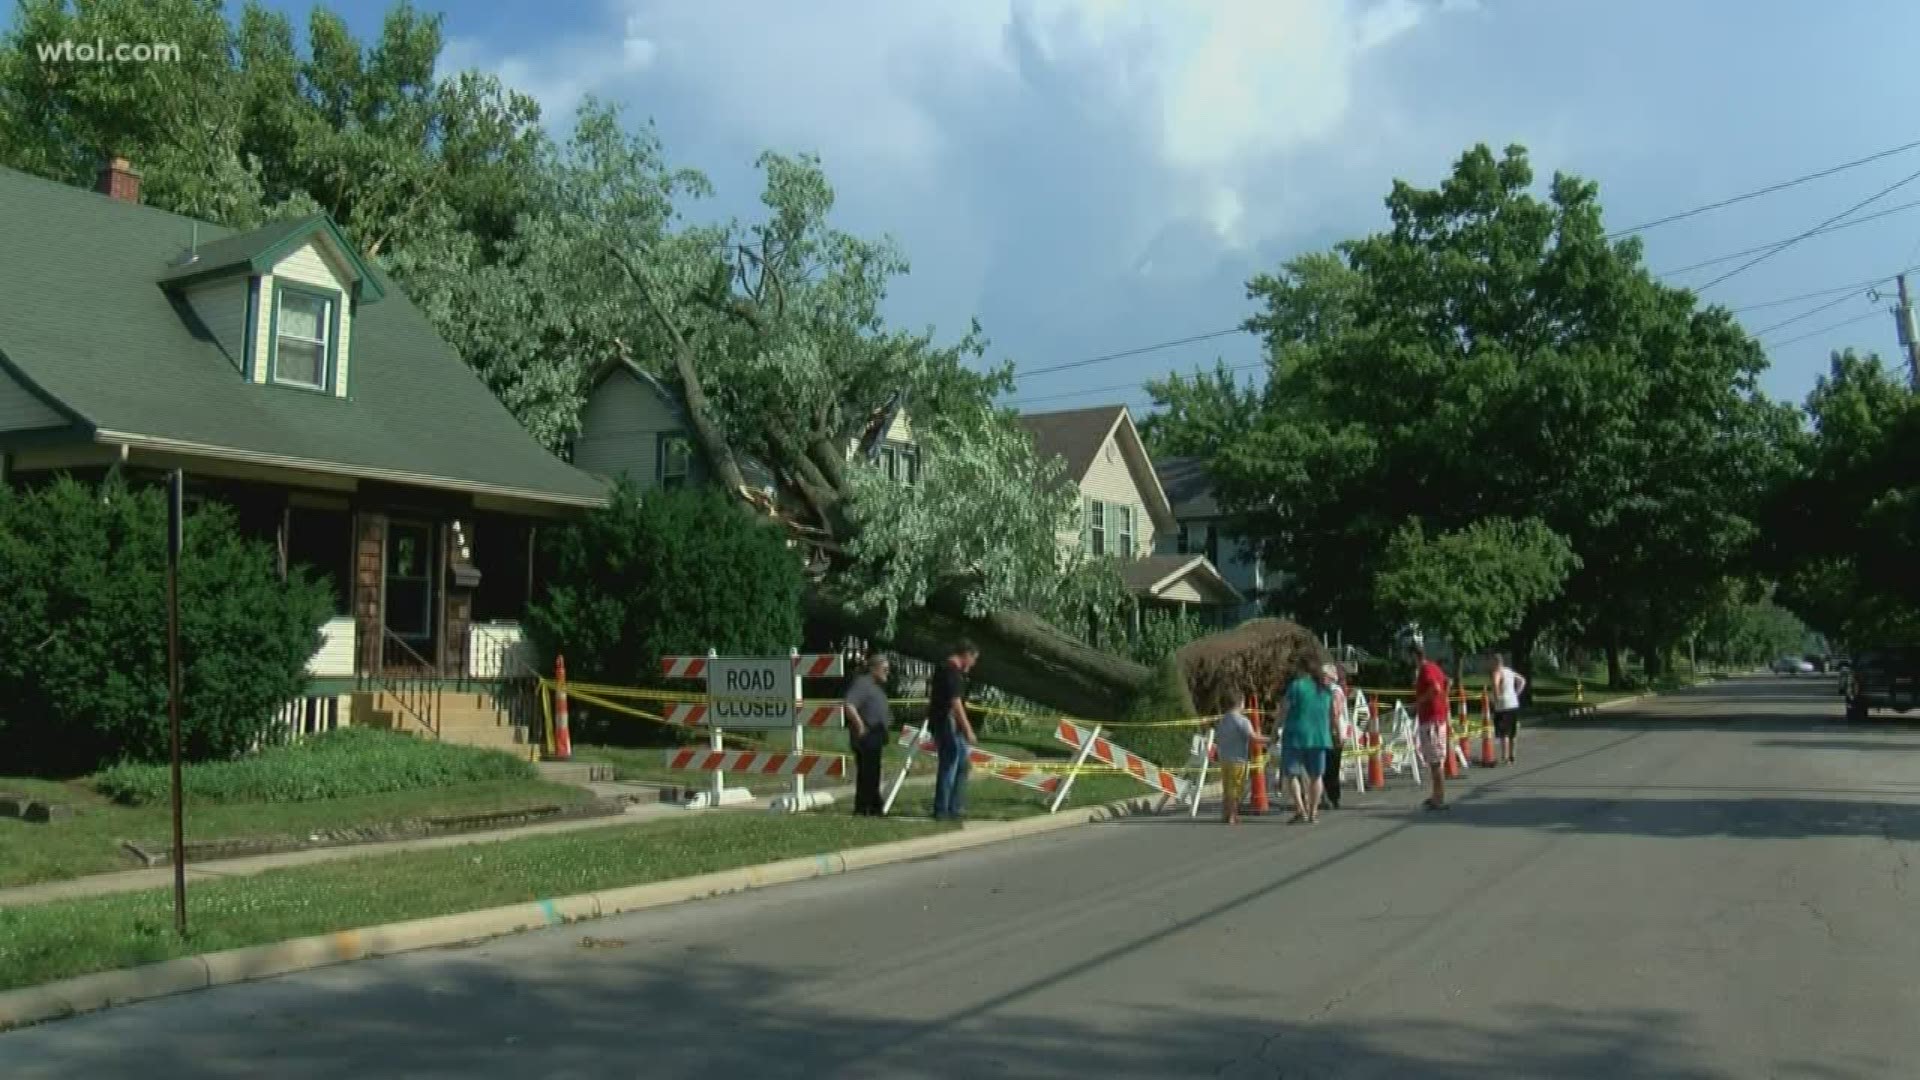 The Red Cross has set up a shelter for those who experienced damage from Tuesday’s storm.